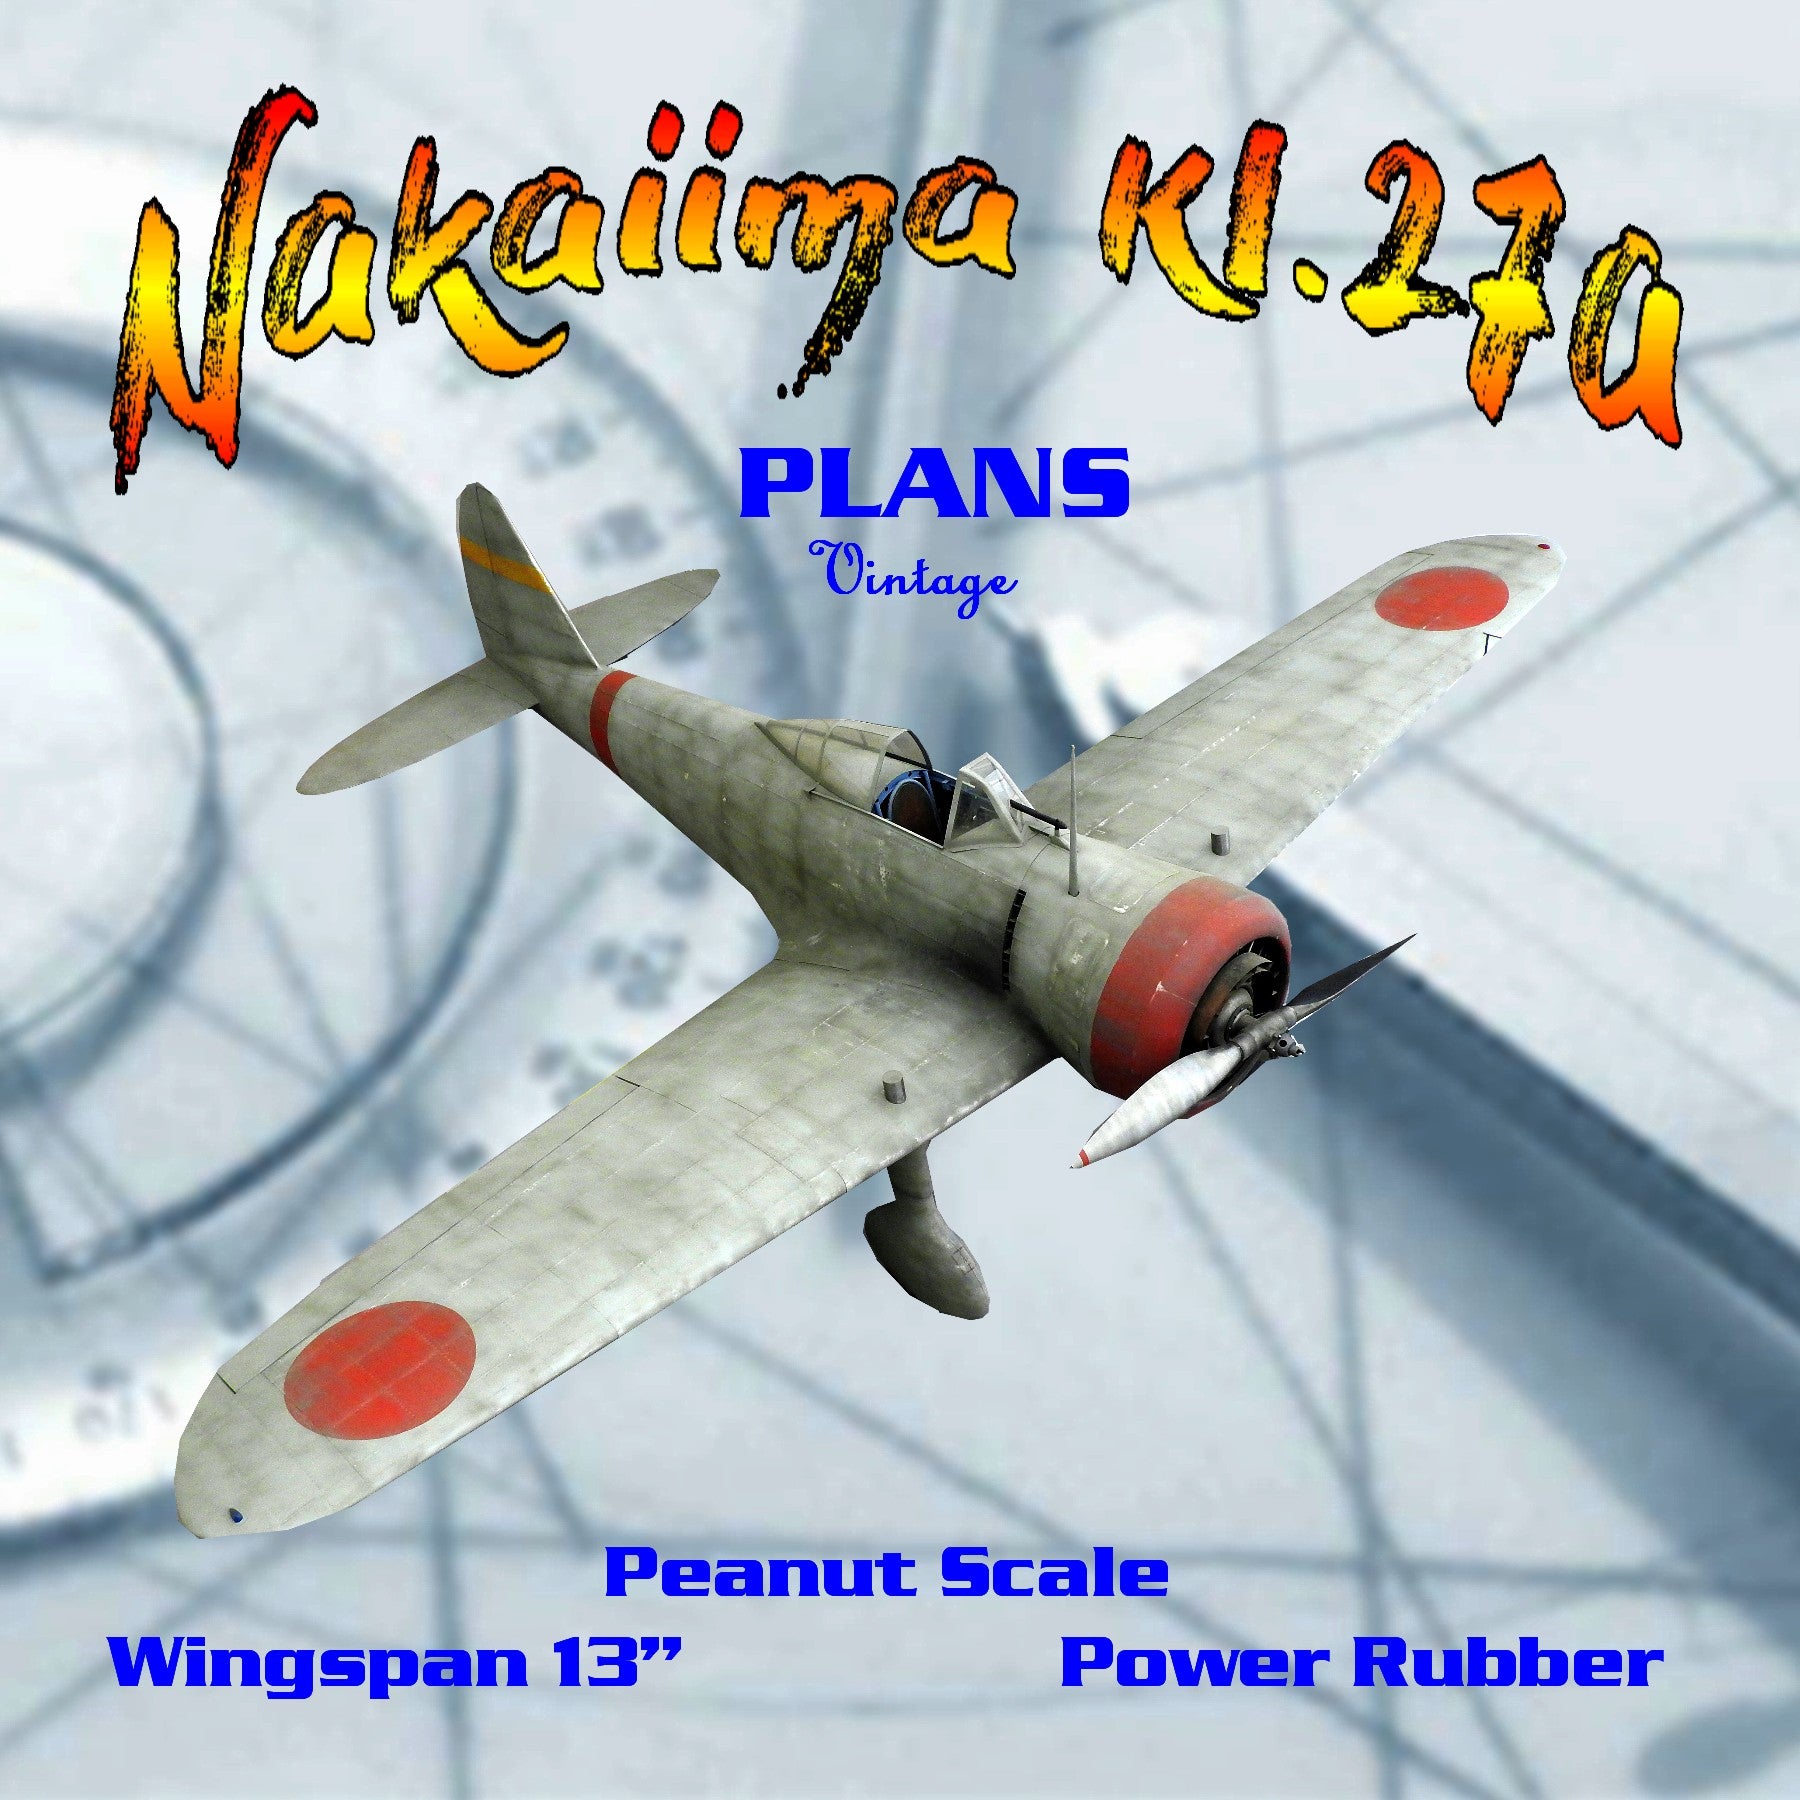 full size printed plans peanut scale "nakaiima ki.27a" looking almost like a modern racer.